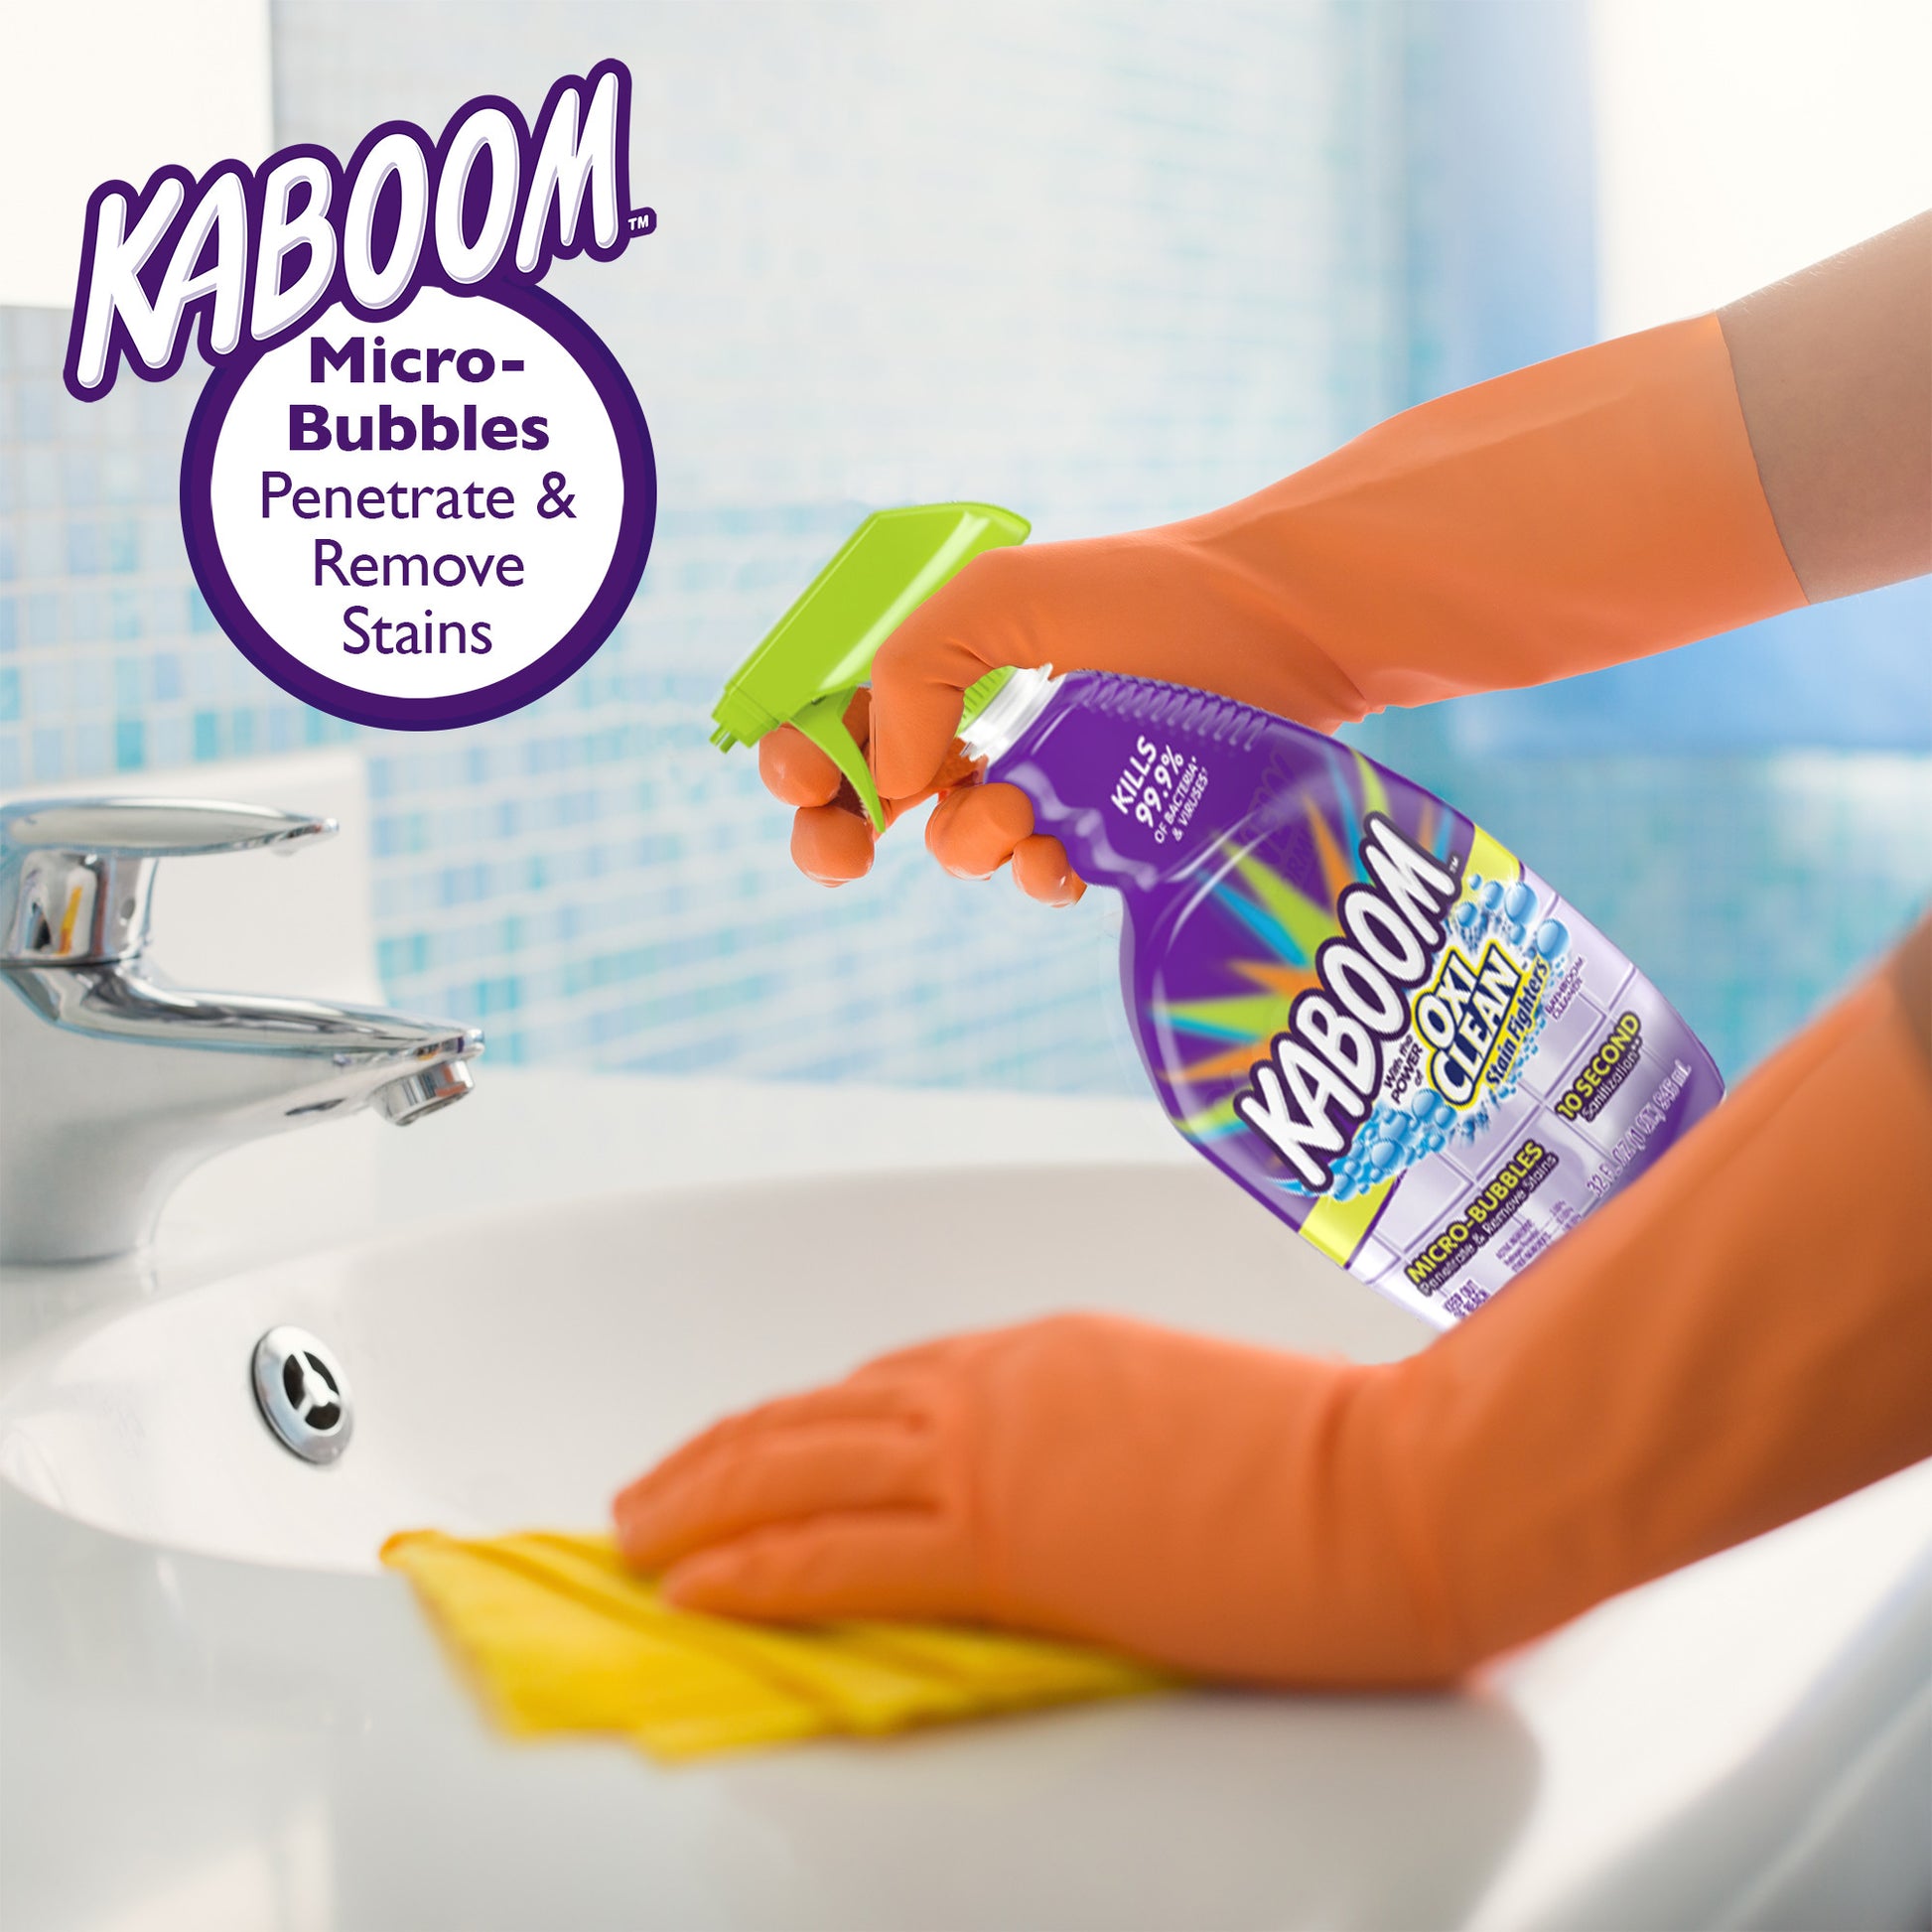 OxiClean Shower, Tub & Tile with the power of OxiClean